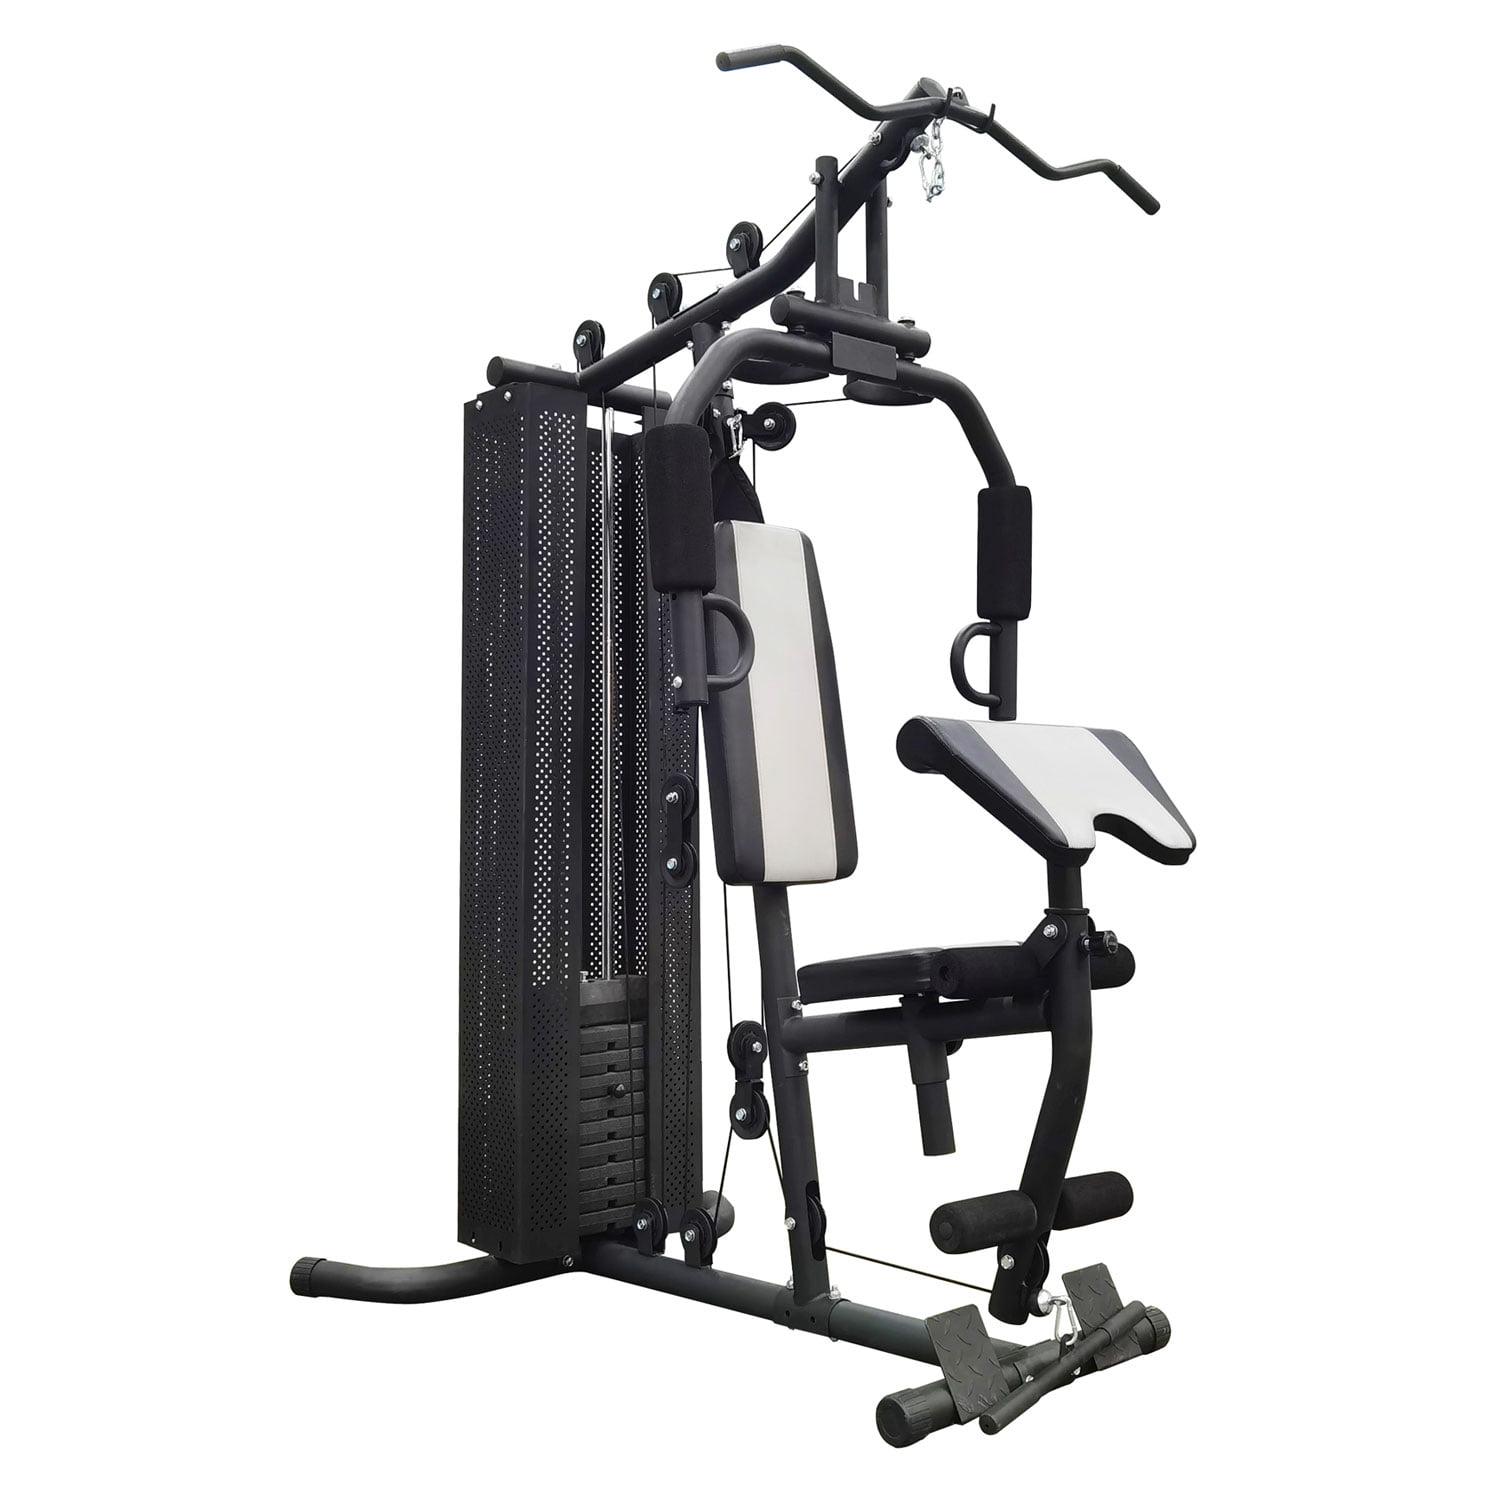 Home gym essentials: The ultimate guide to fitness equipment